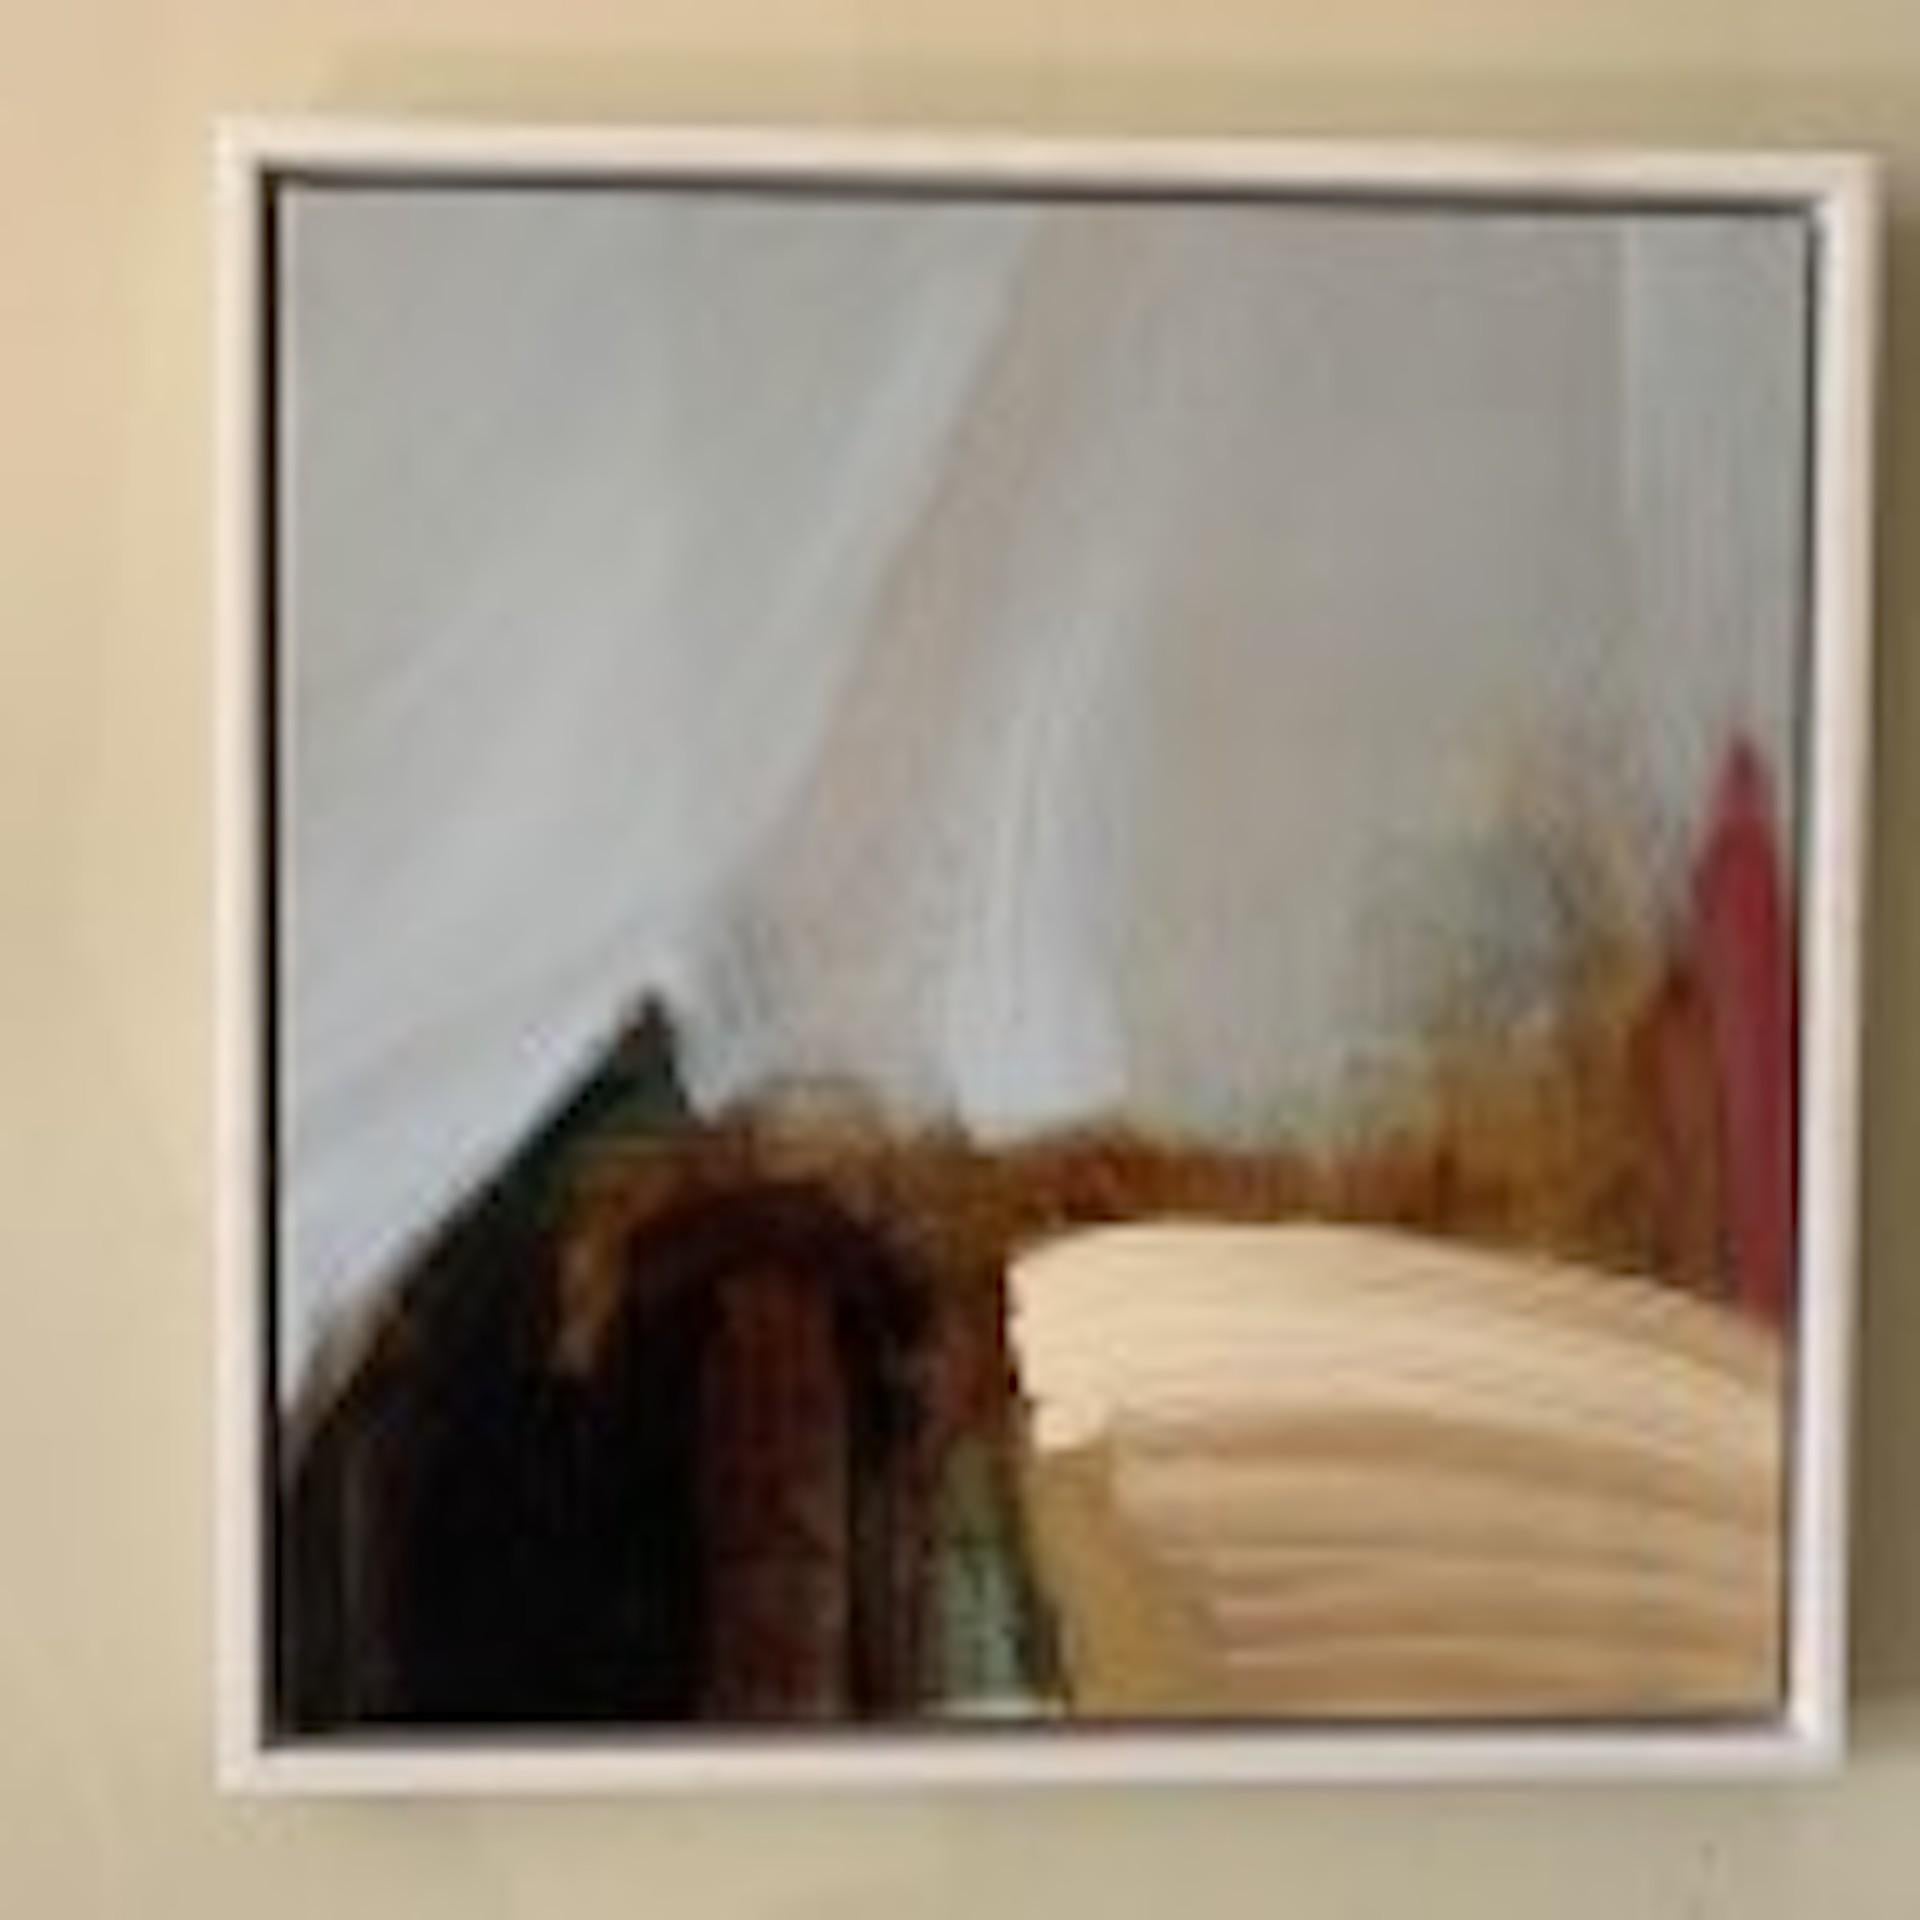 Jill Campell
Fell 8
Original Landscape Painting
Acrylic on canvas
Image Size: H 40cm x W 40cm x D 1.5cm
Framed Size: H 43cm x W 43cm x D 3cm
Sold Framed (Wooden White Float Frame)
Please note that in situ images are purely an indication of how a